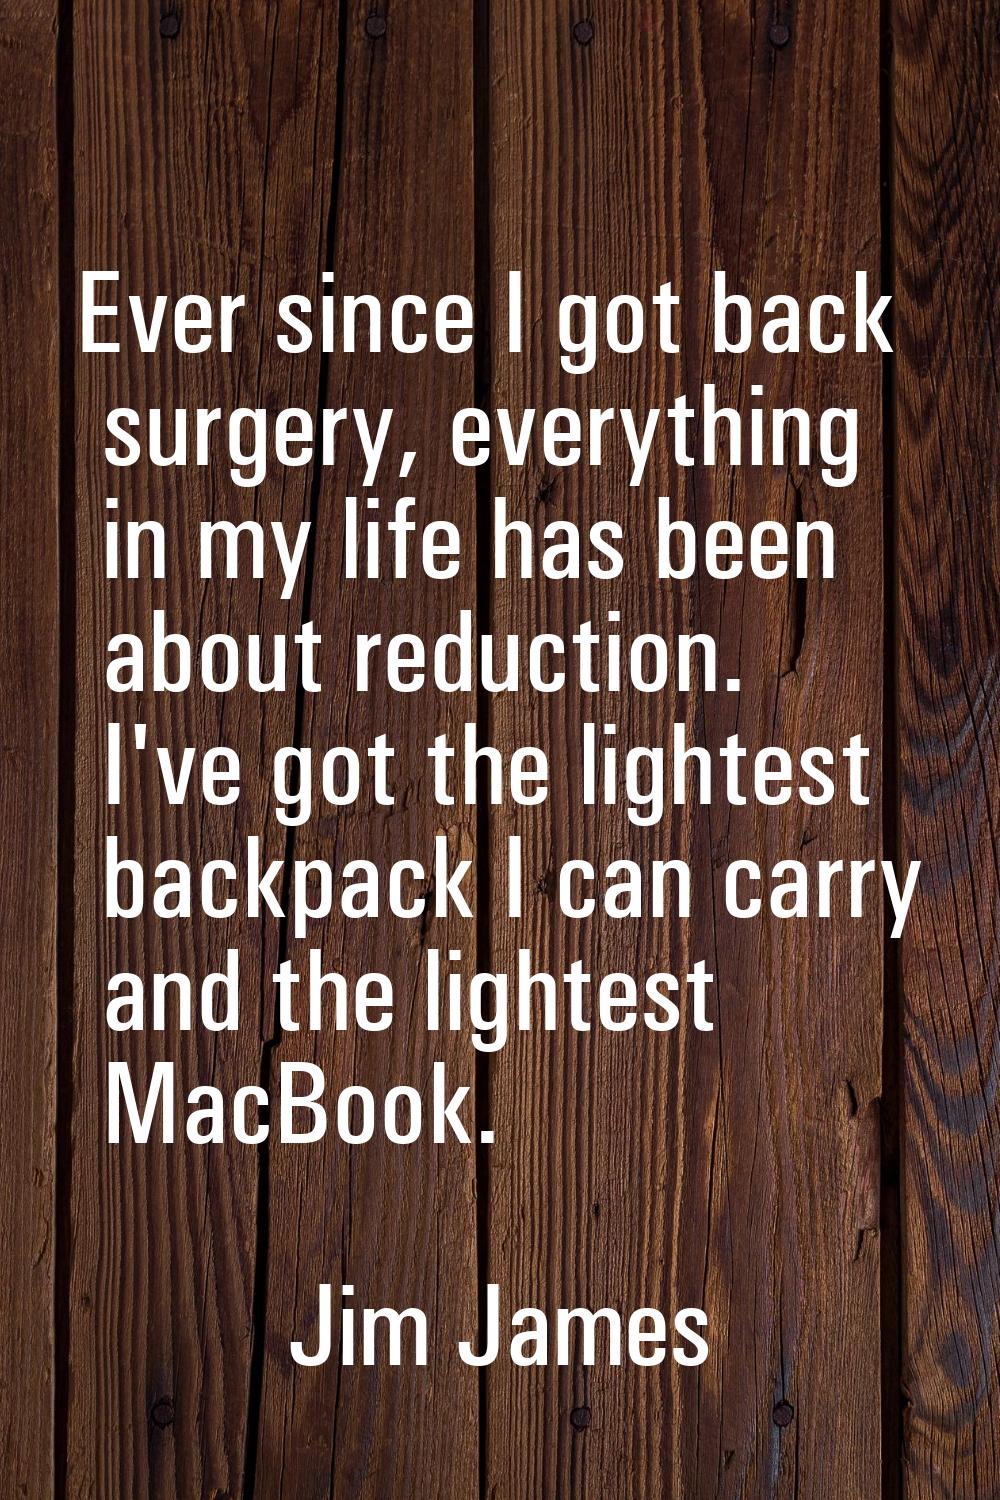 Ever since I got back surgery, everything in my life has been about reduction. I've got the lightes